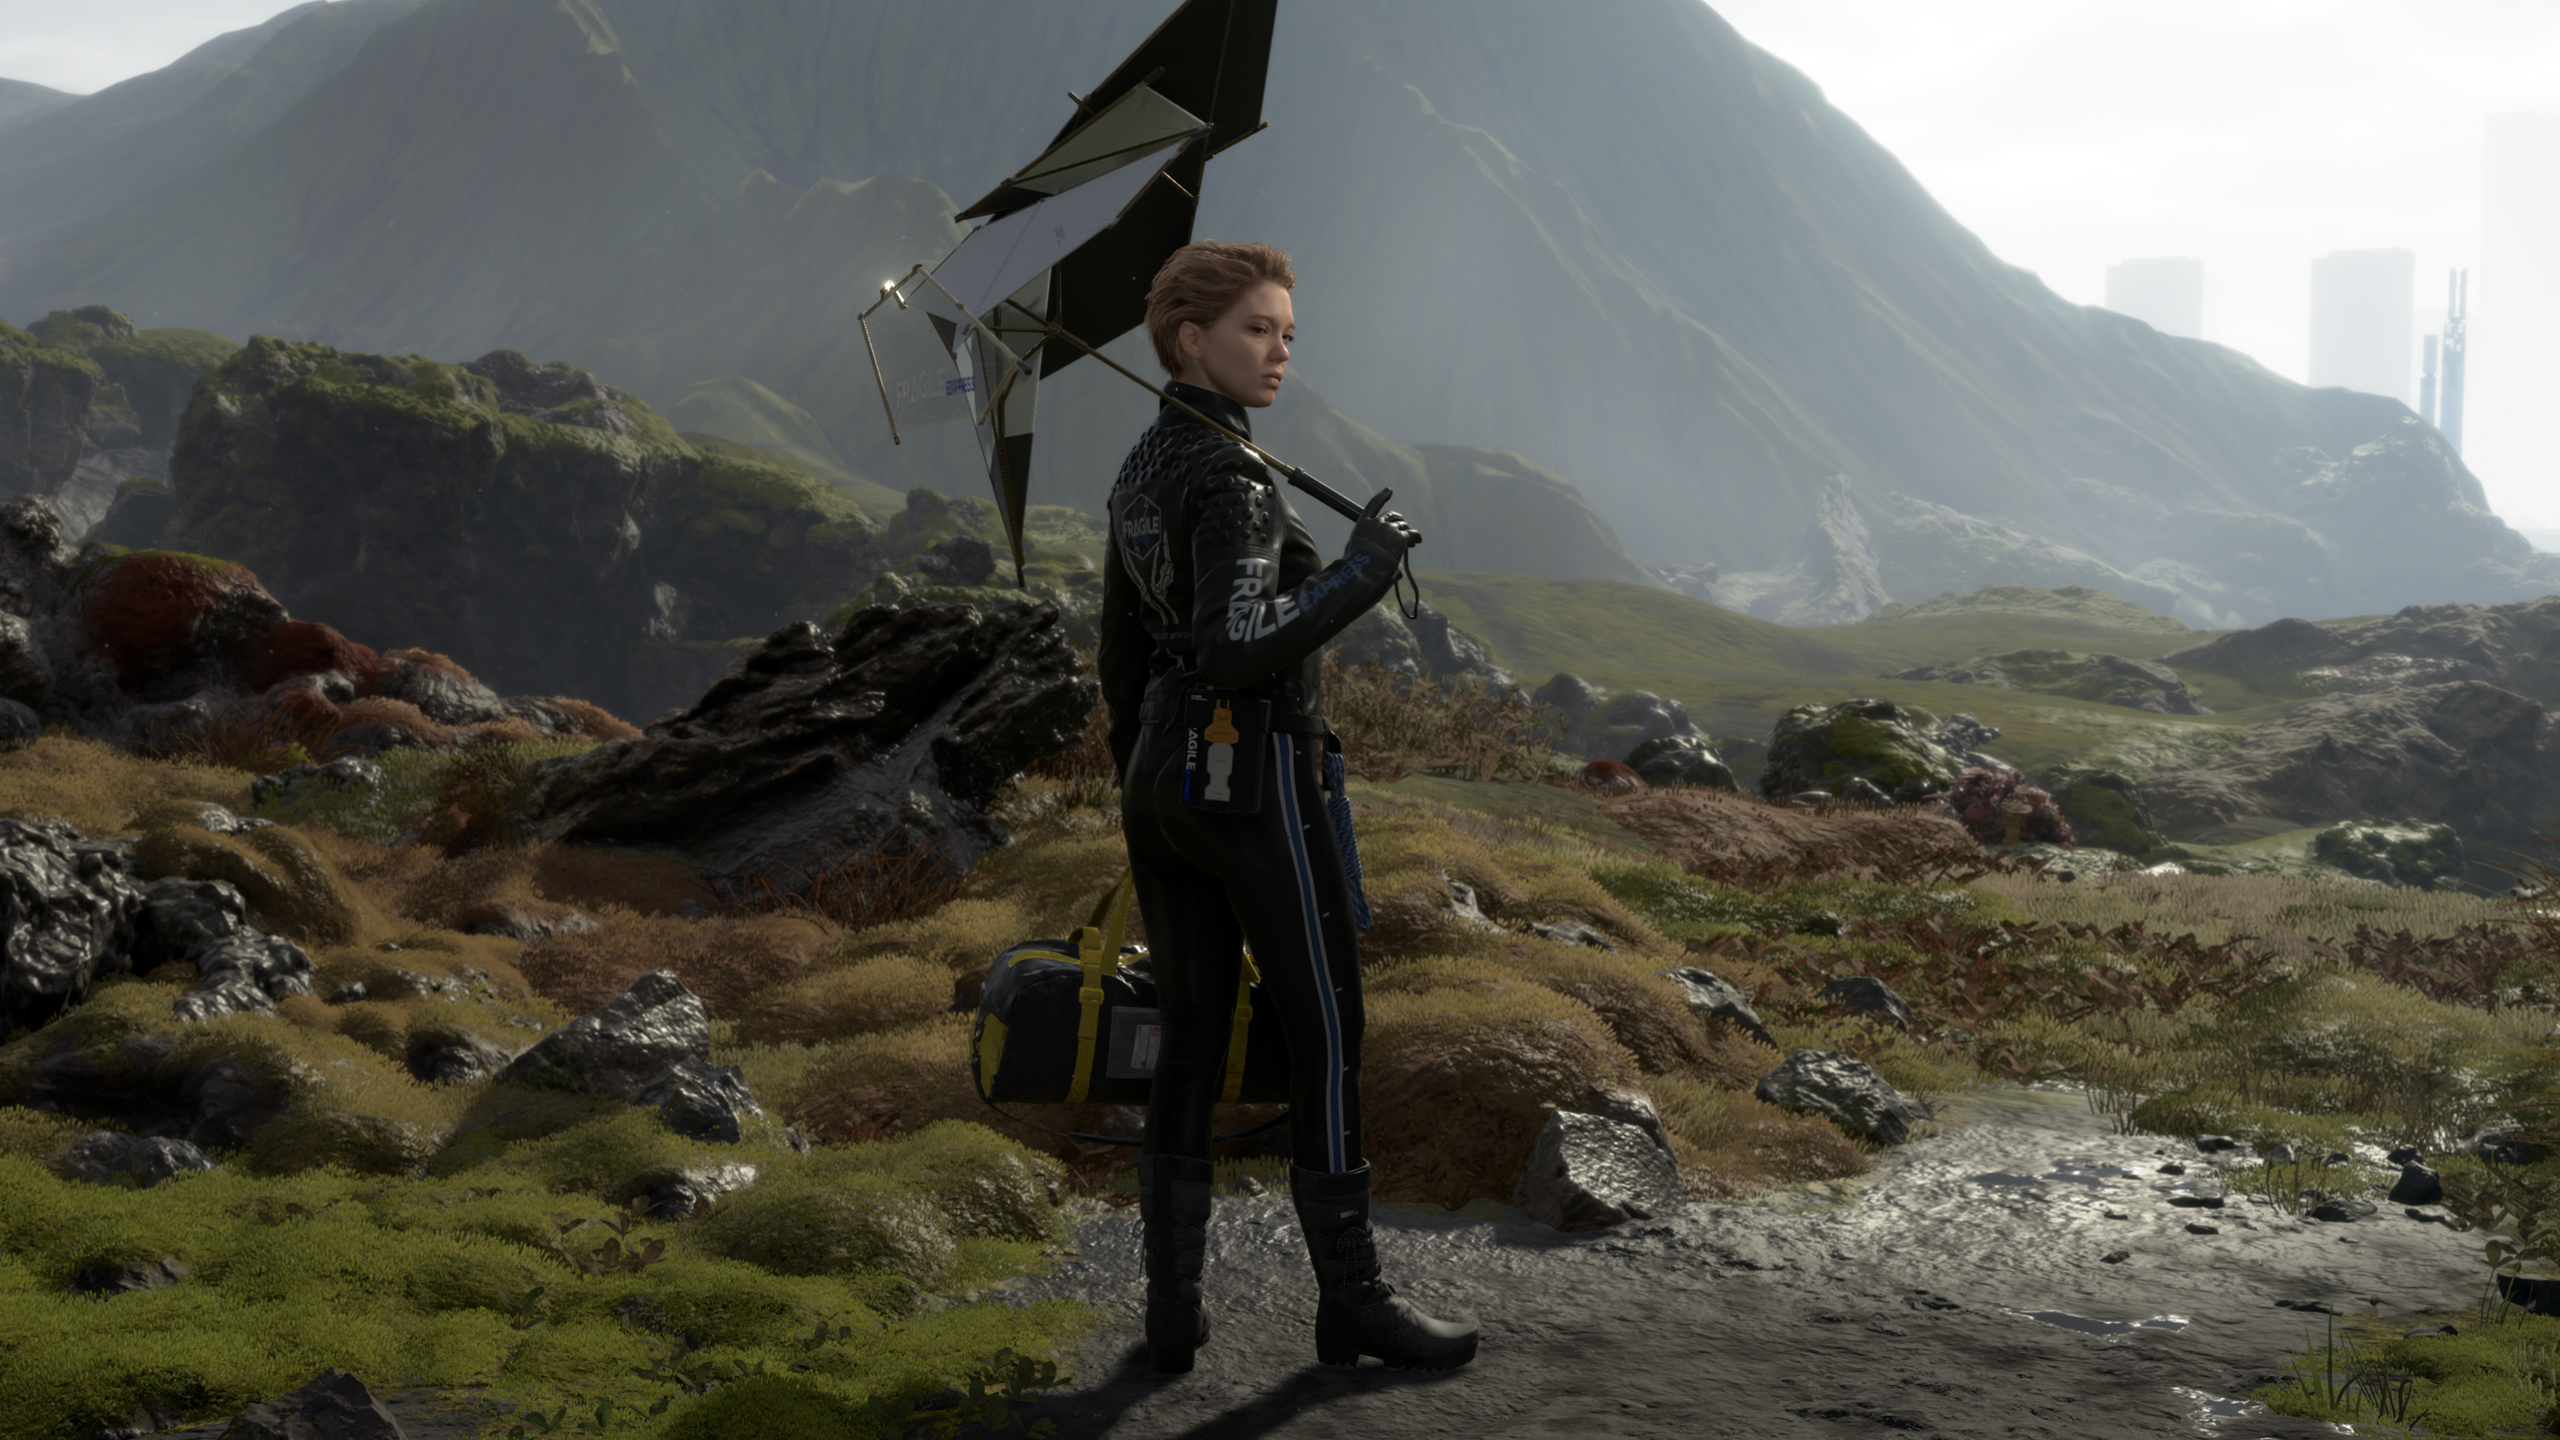 Japanese voice acting in Death Stranding 2 will be recorded this year